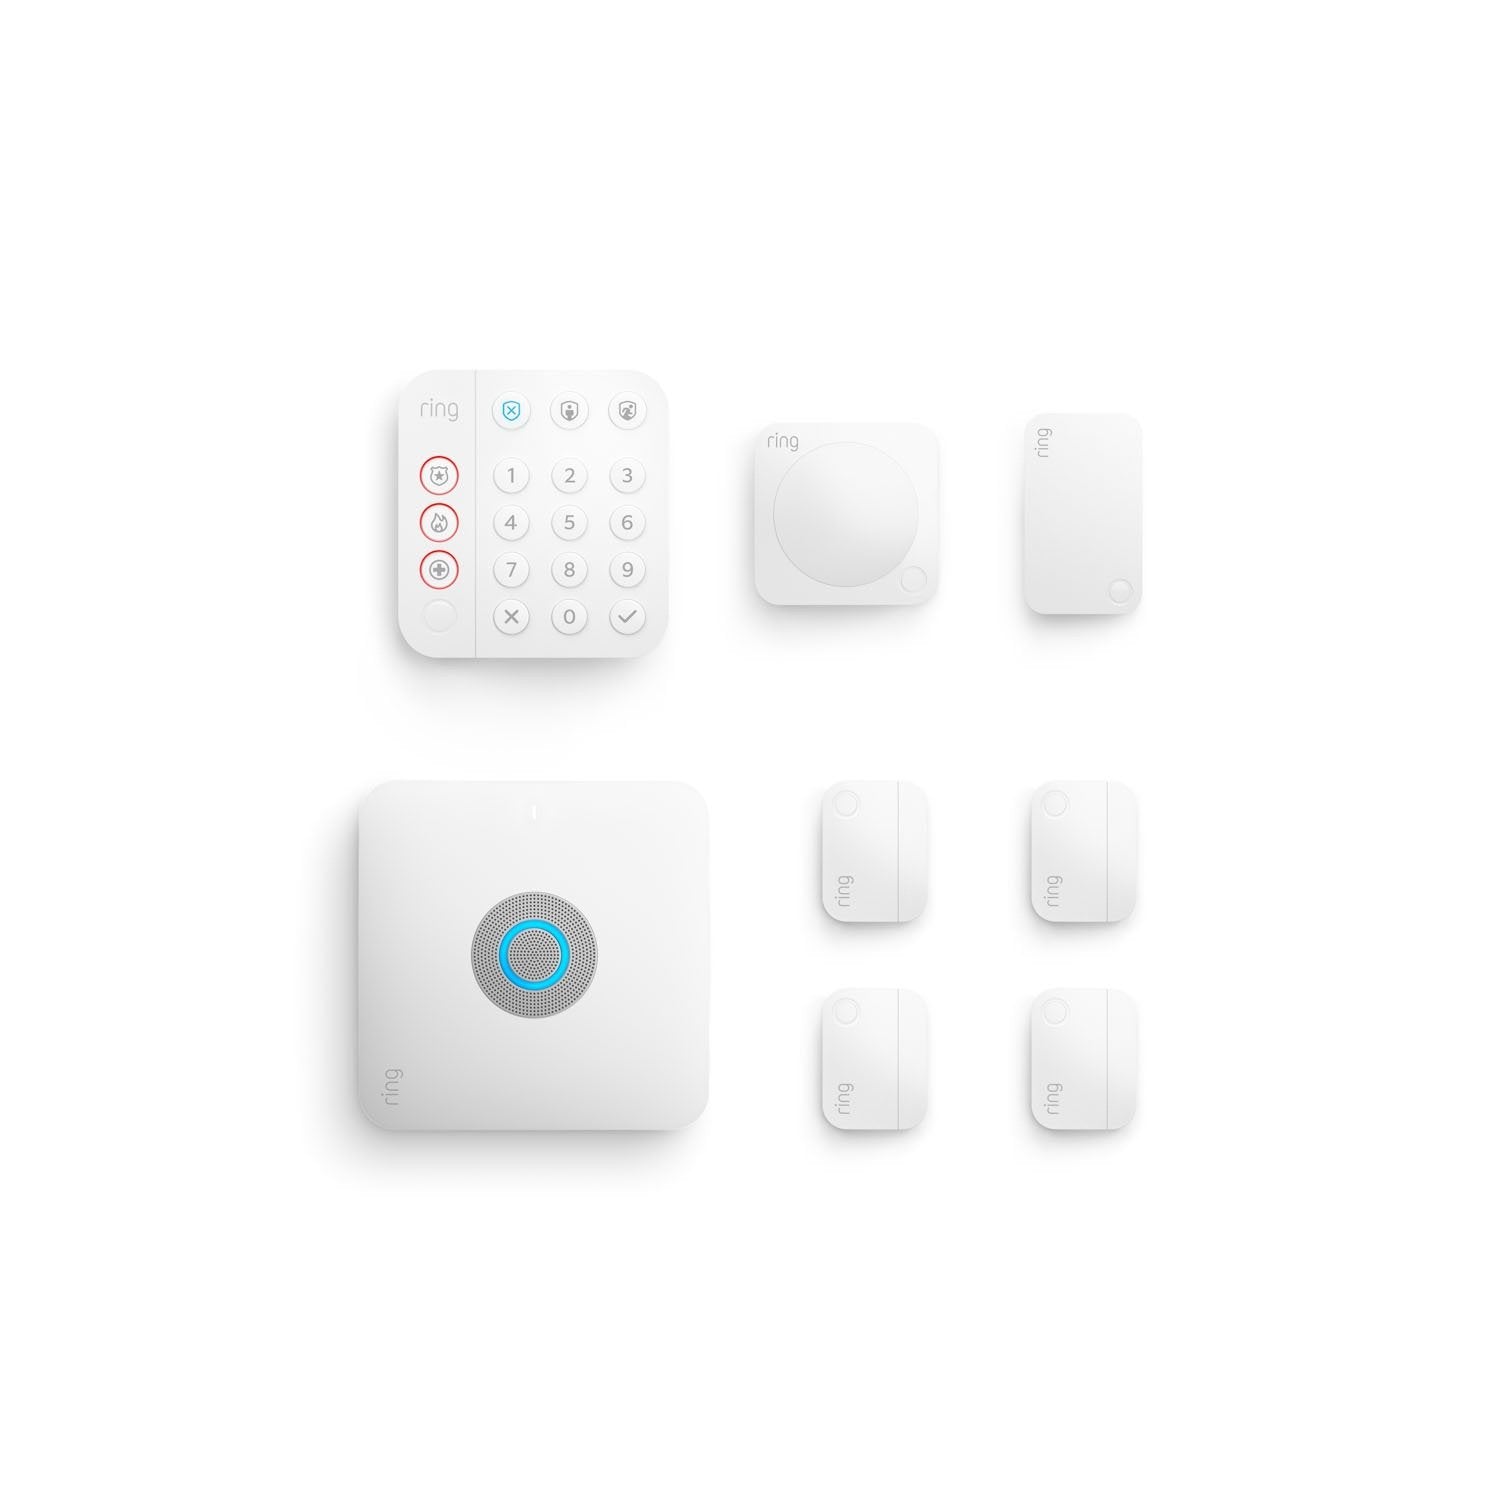 Alarm Pro Security Kit, 8-Piece (with built-in eero Wi-Fi 6 router) - White:Alarm Pro Security Kit, 8-Piece (with built-in eero Wi-Fi 6 router)